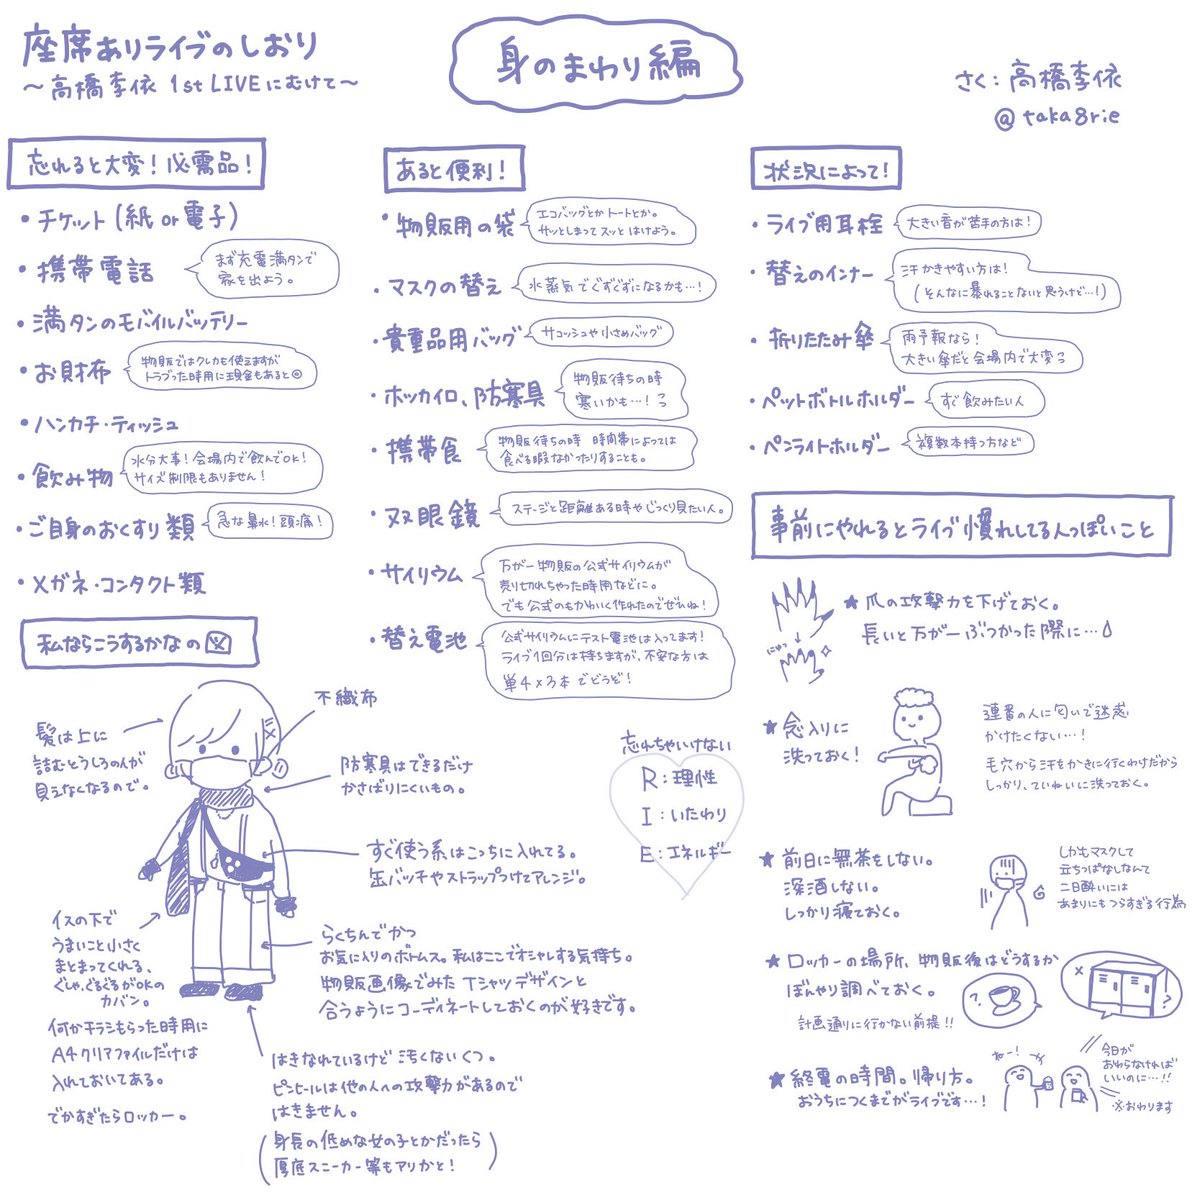 Rie Takahashi, the popular Voice Actress and Singer requests her fans to bathe before her Concert. 

For her first concert she created a cute infographic filled with tips on what to do including 'Make sure you wash your body beforehand to don't bother others with your odor!'